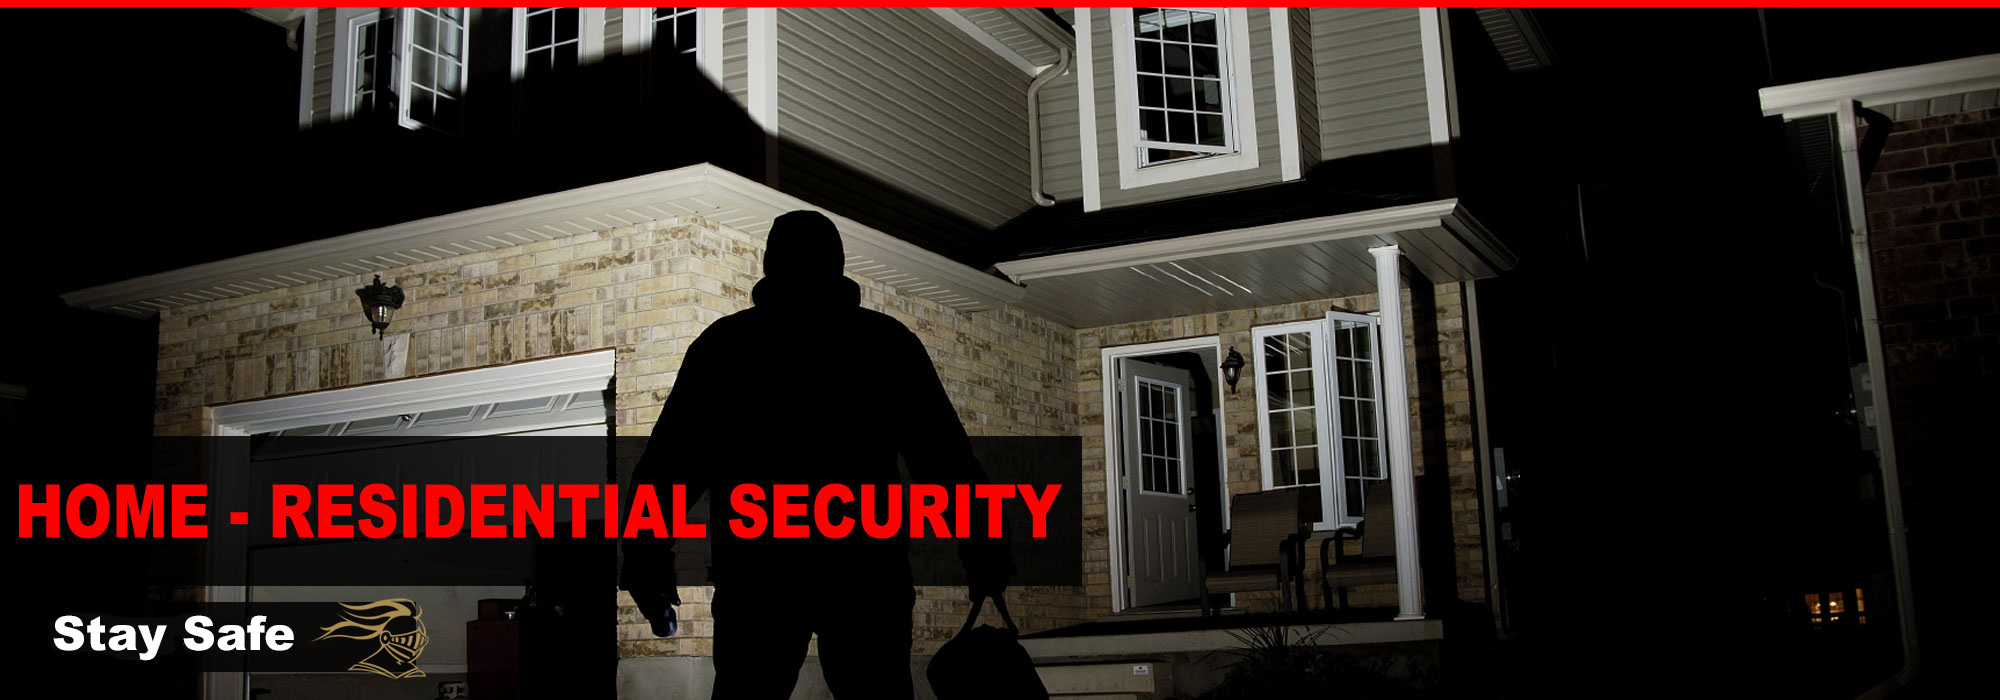 Your family is important, our agents are bound by strict privacy policies and dedicated to duty.